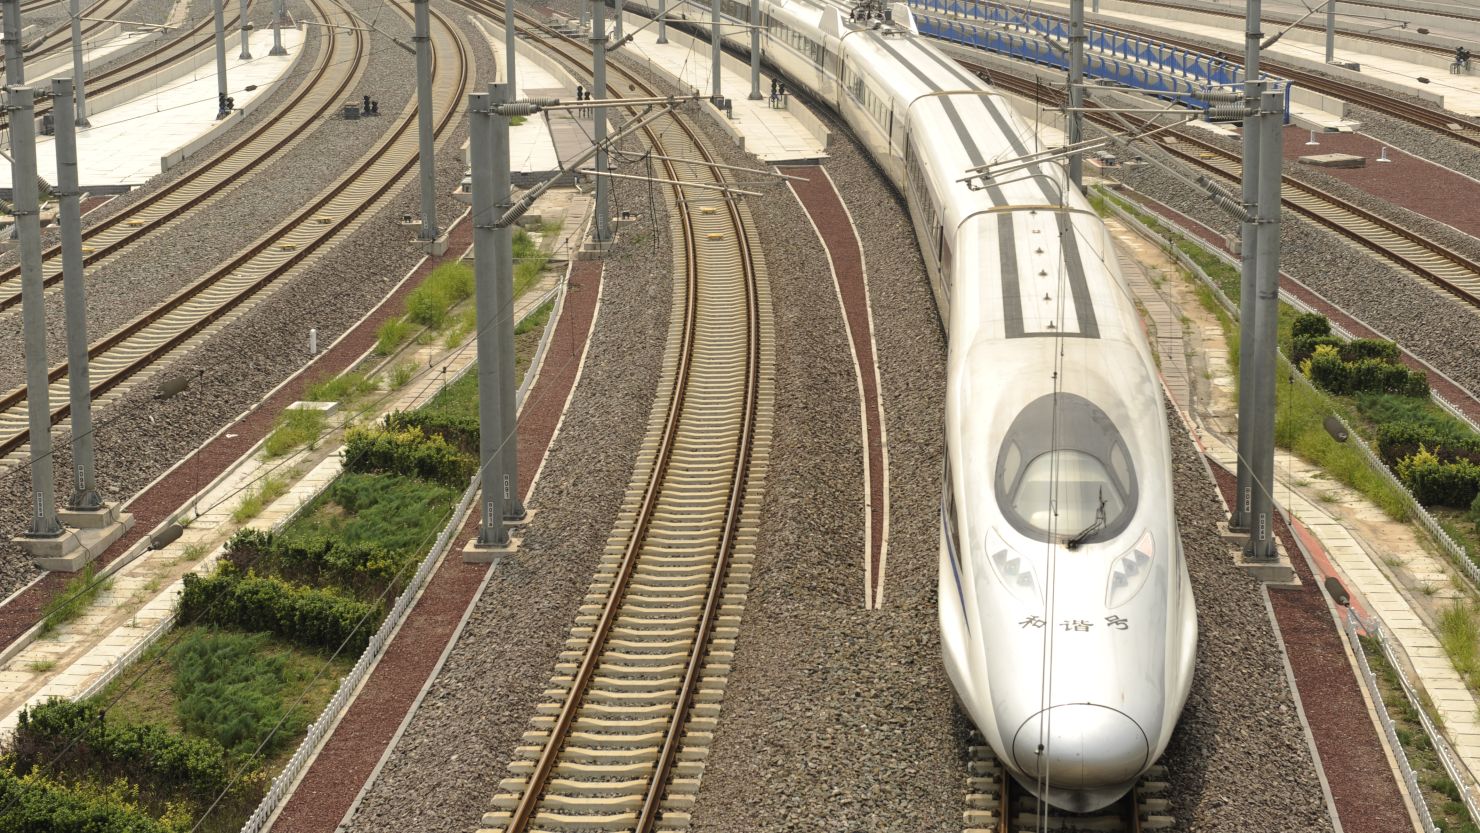 China has built more than 8,000 kilometers of high-speed rail lines in recent years 